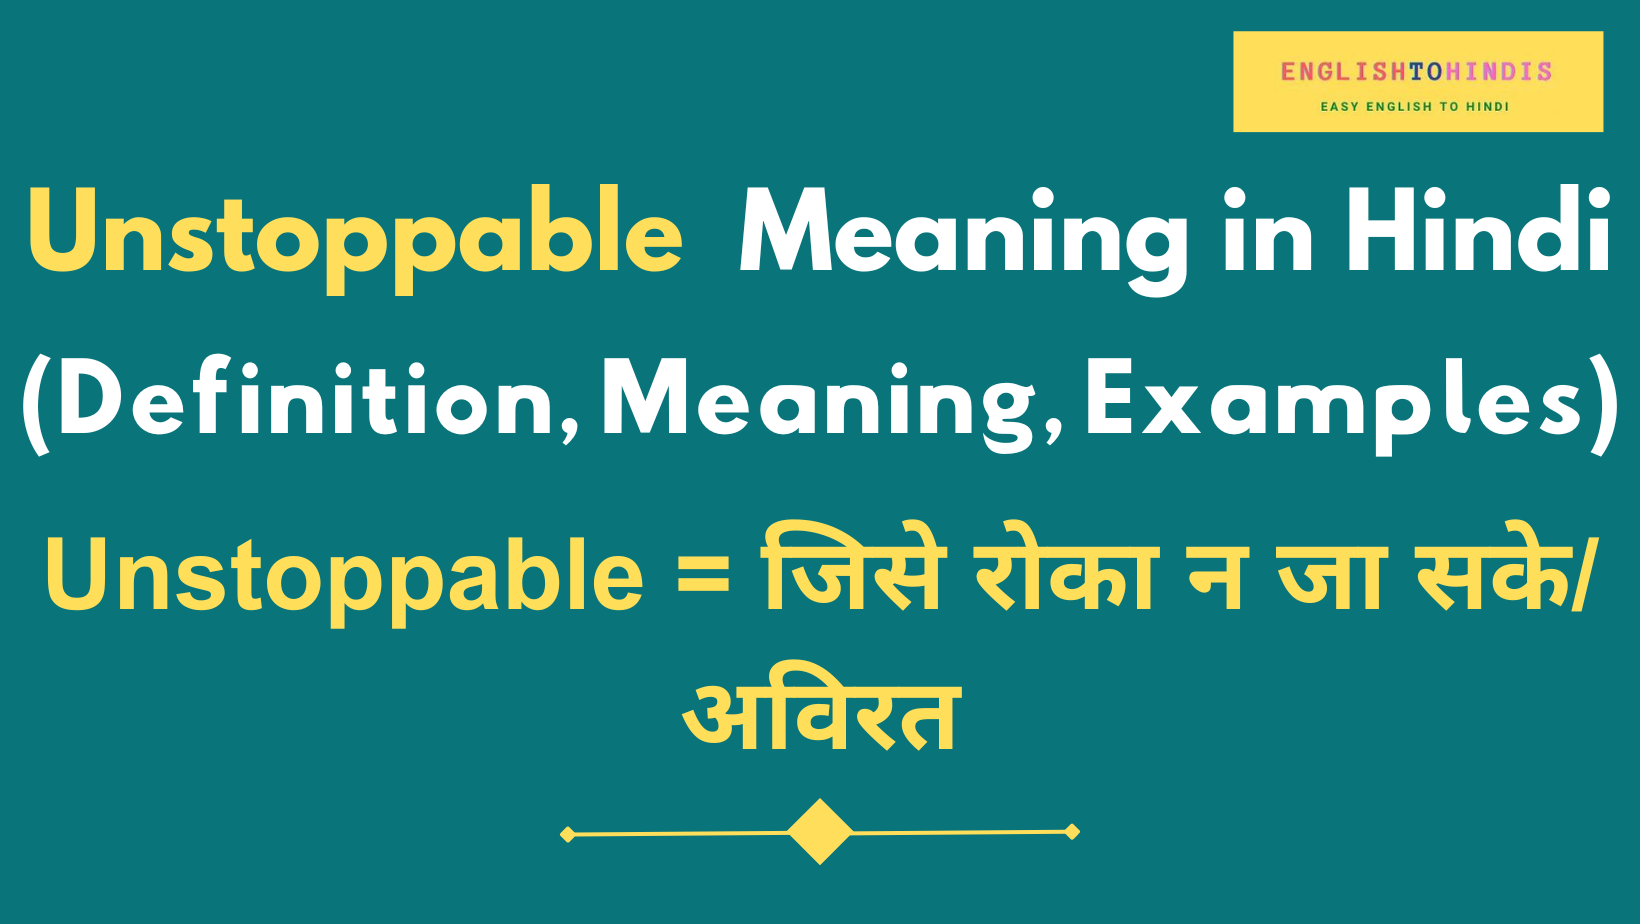 Unstoppable Meaning in Hindi